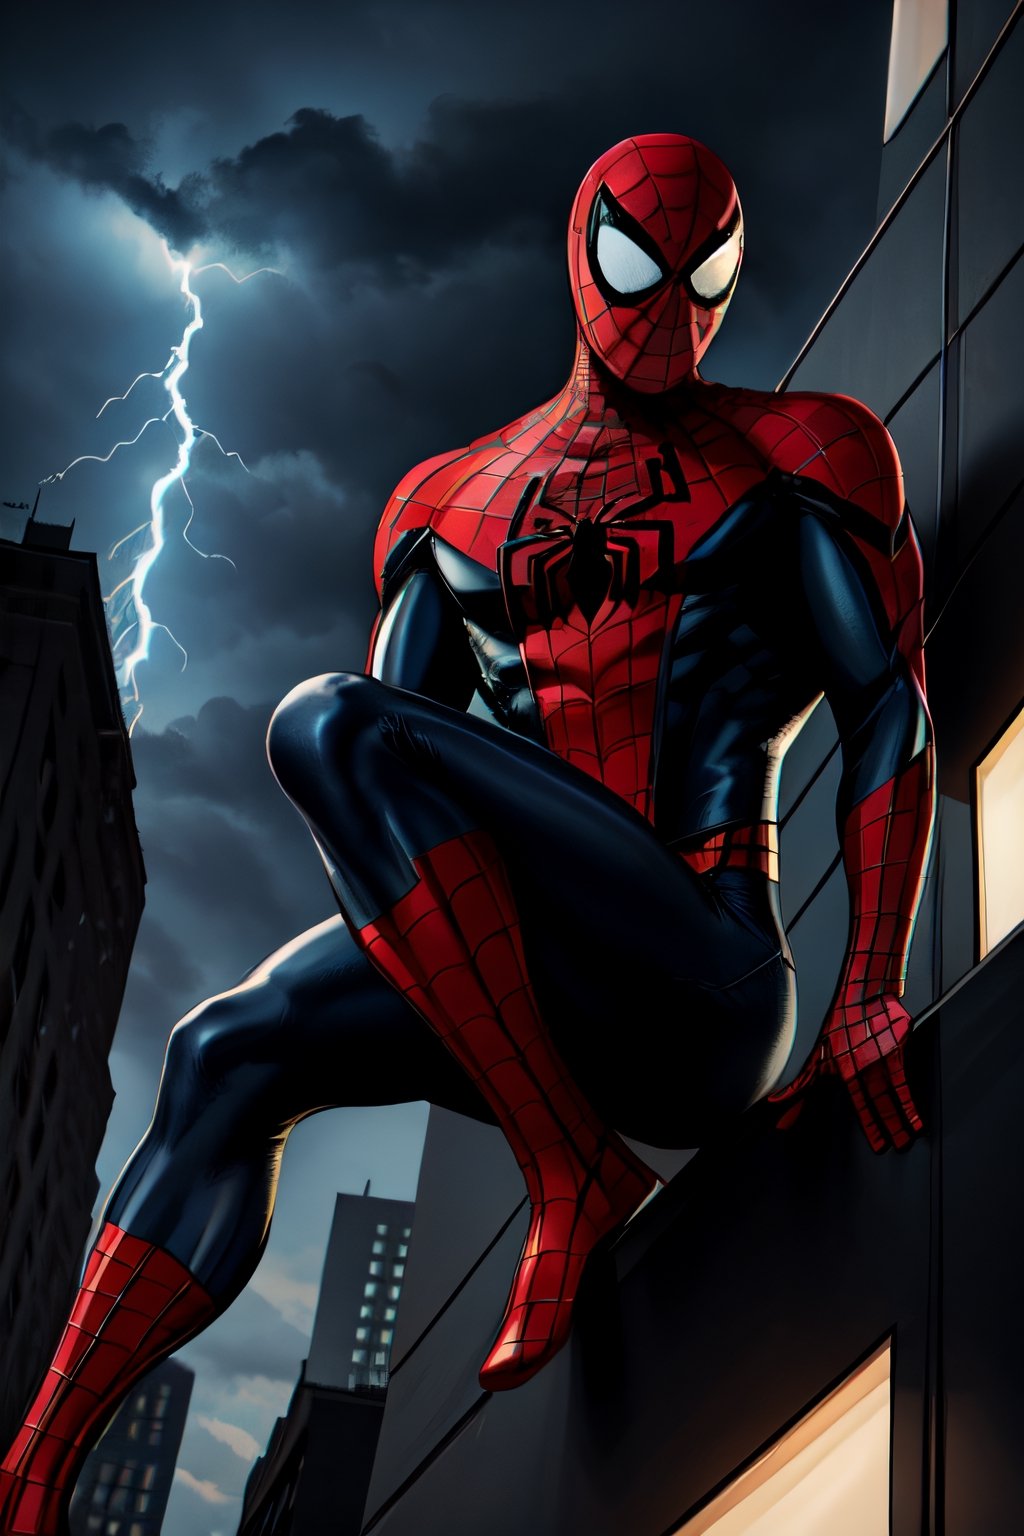 Spider-Man, facial portrait, crouched, On top  of the building, streets below, cars driving, crowds walking, cloudy sky, lightning ,spider-man costume